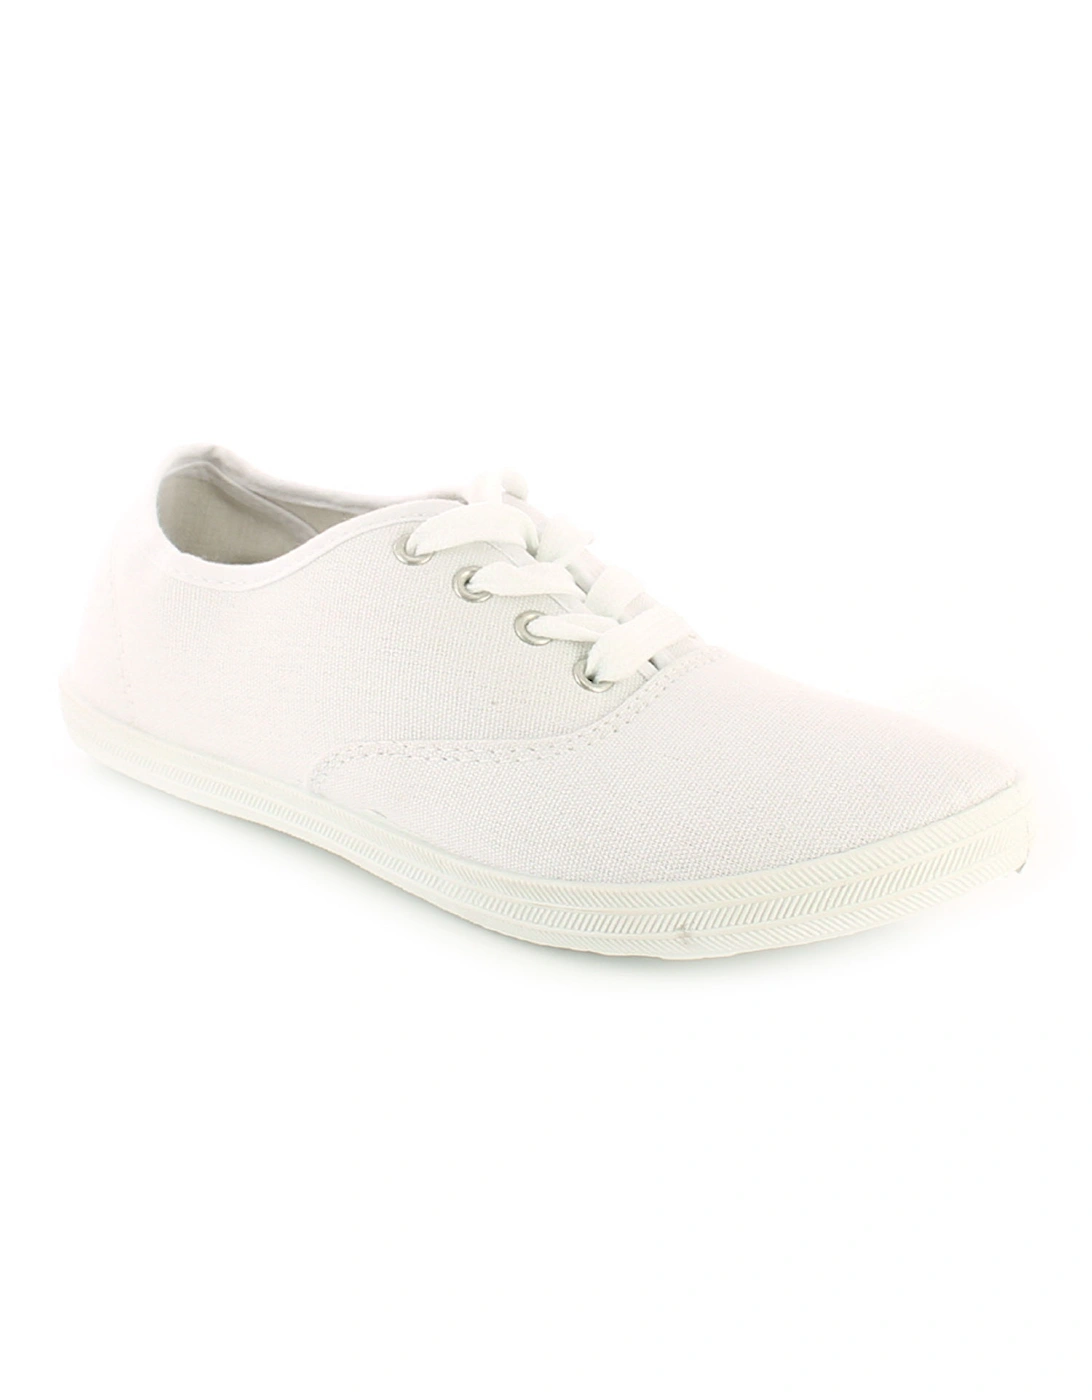 Womens Canvas Pumps Plimsolls Monster Lace Up white UK Size, 6 of 5